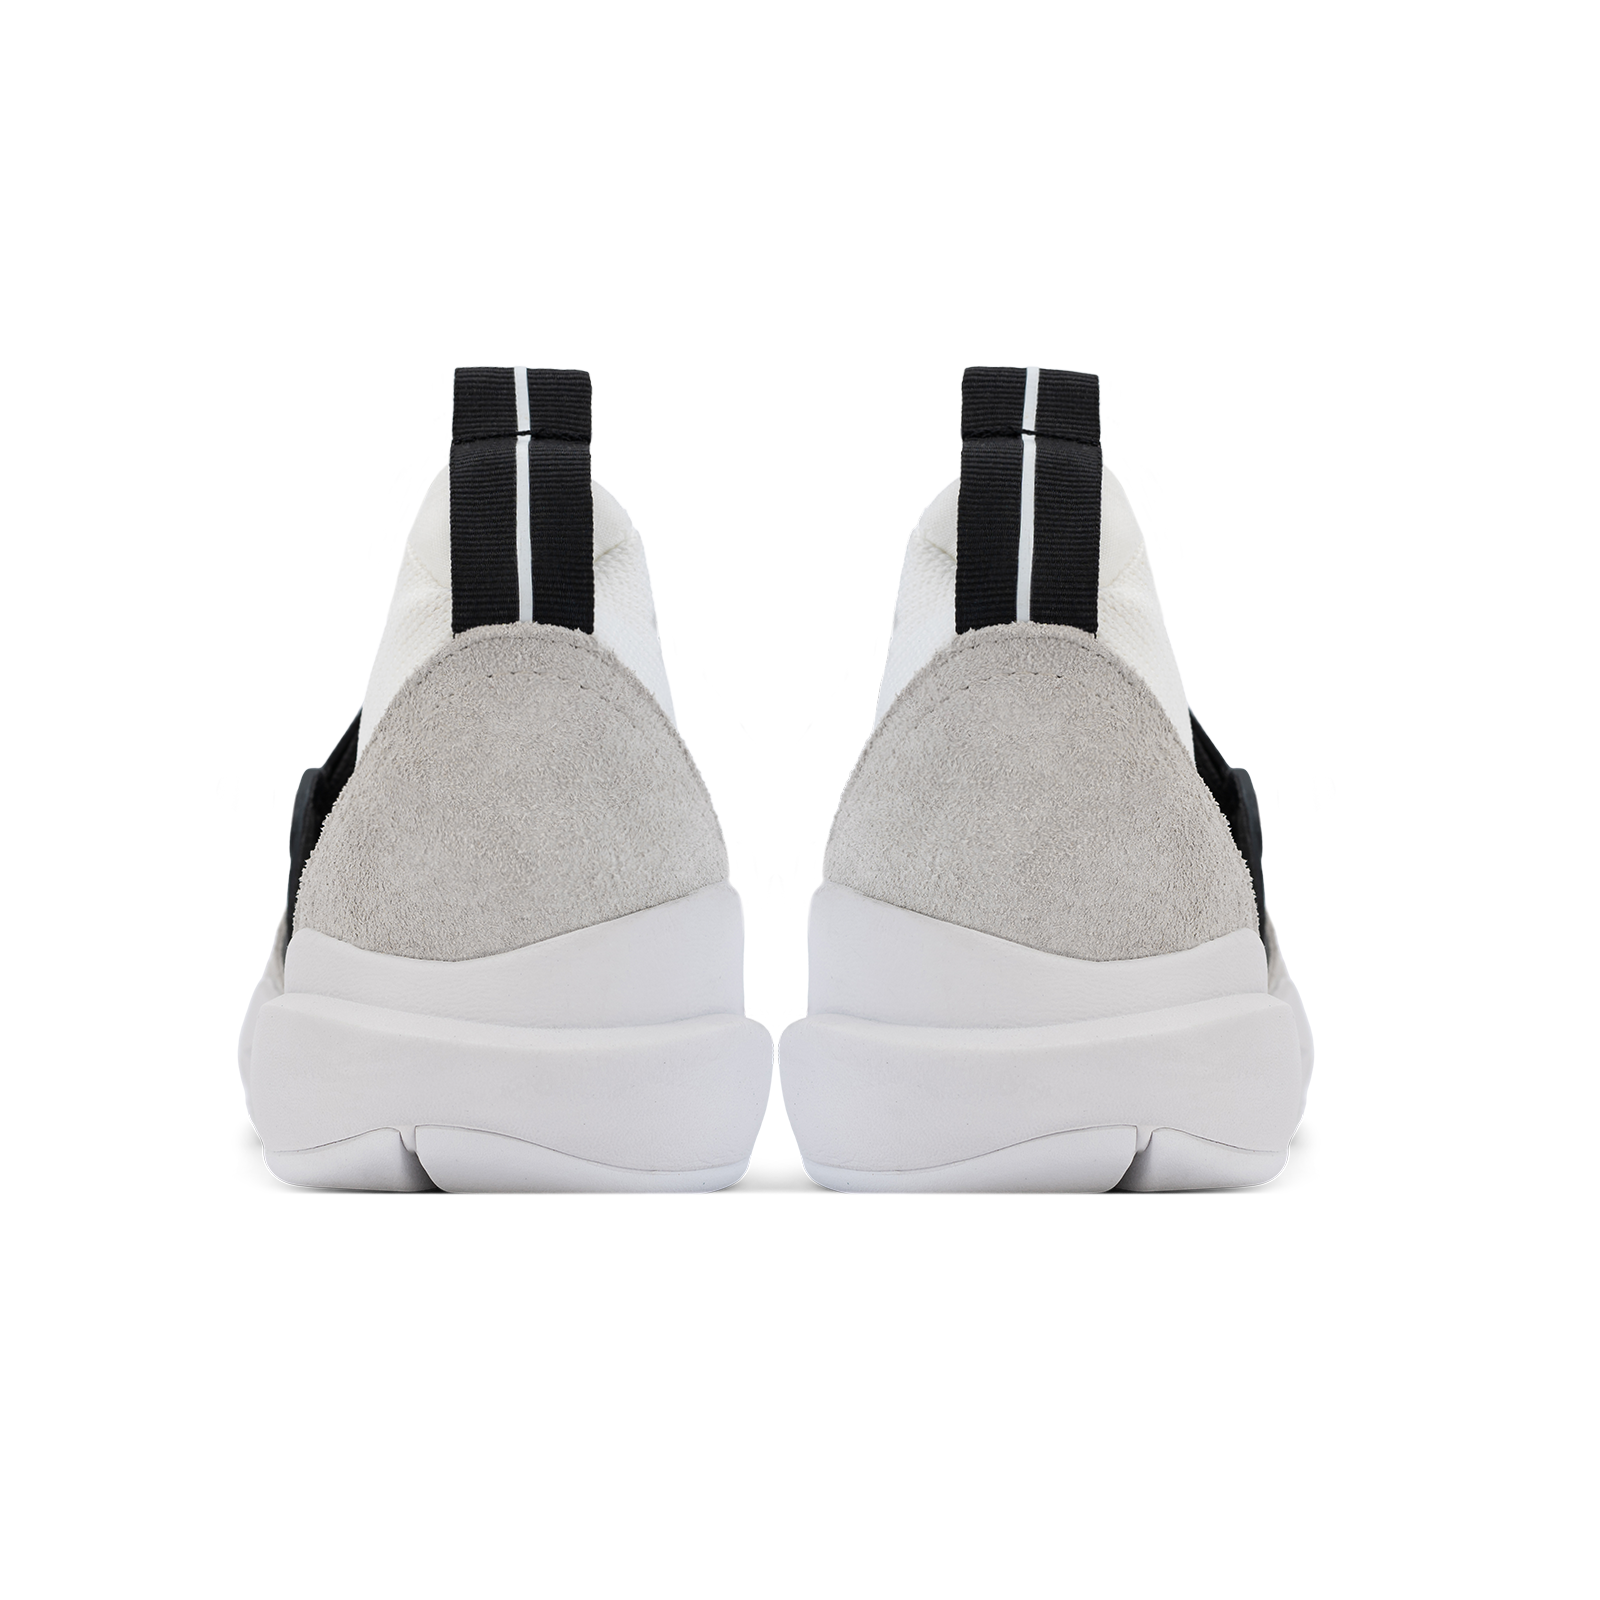 Back view, Cloudstryk Fairbanks is a runner with White suede overlays white stretch mesh underlays, Black heel pull molded lace holder, white eva midsol and white rubber outsole.